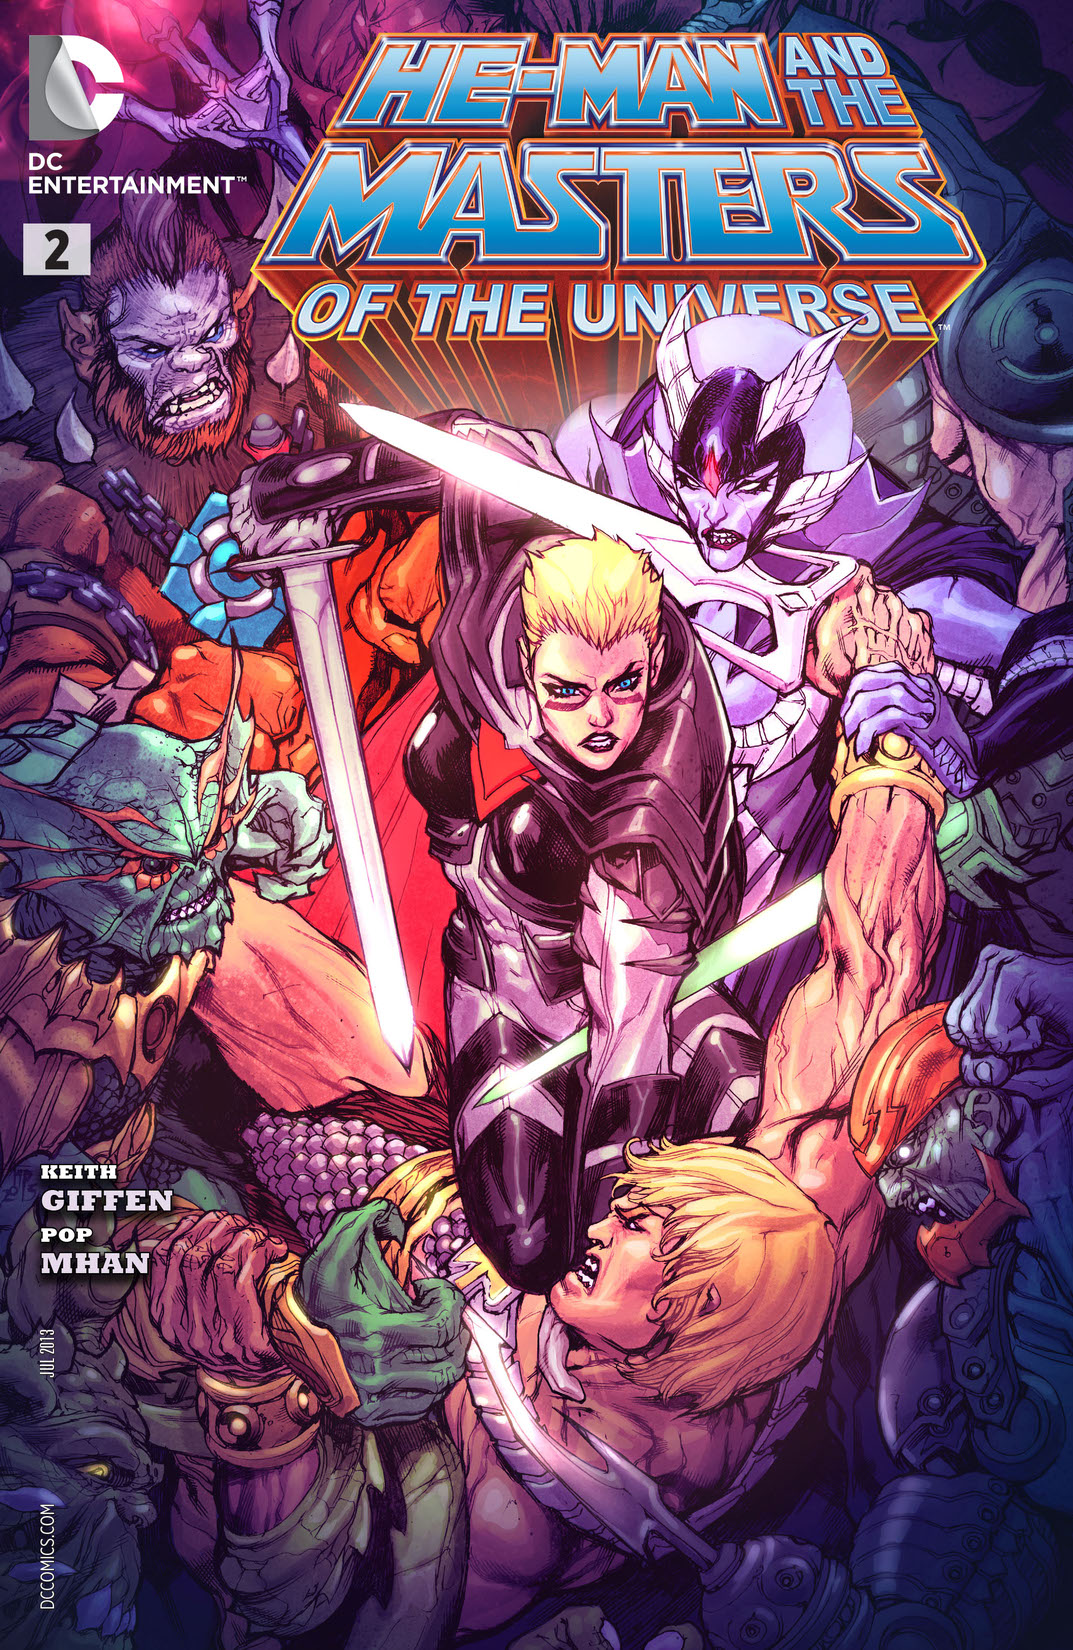 He-Man and the Masters of the Universe (2013-) #2 preview images